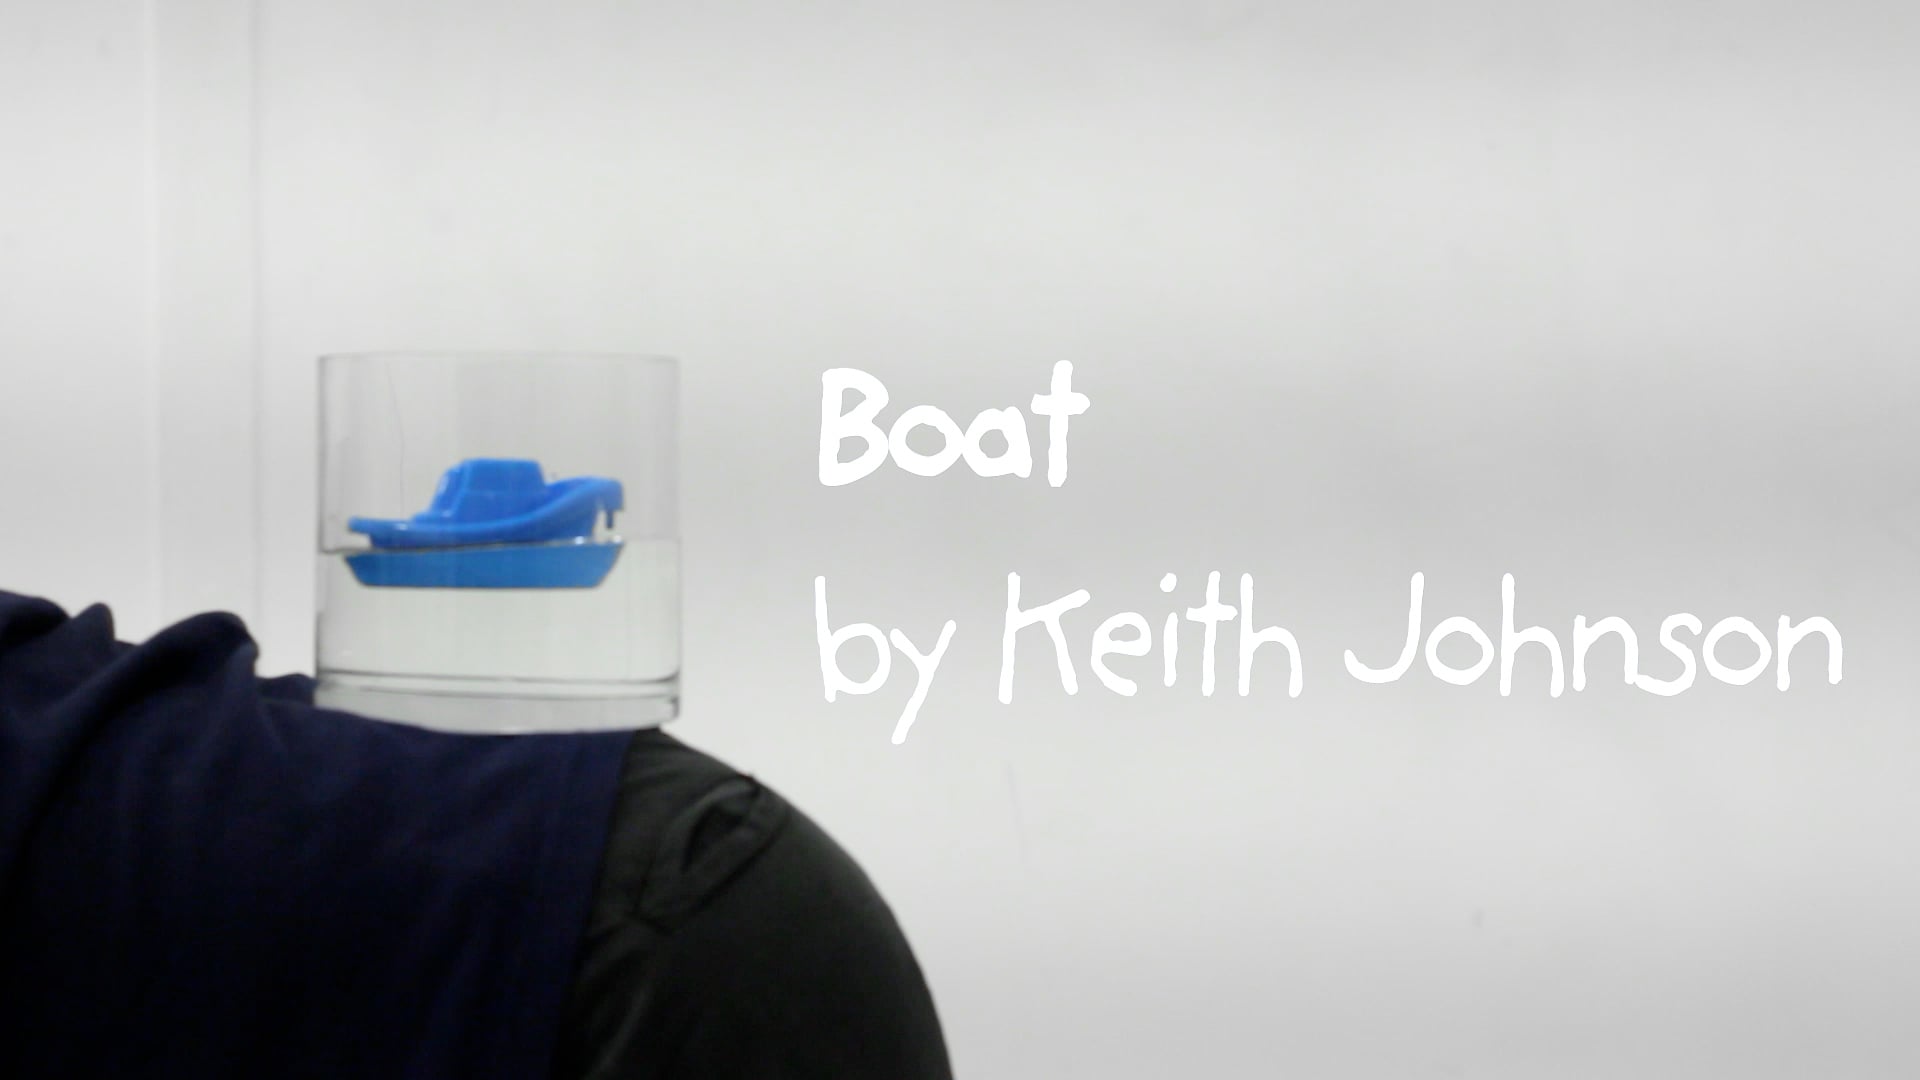 Boat by Keith Johnson